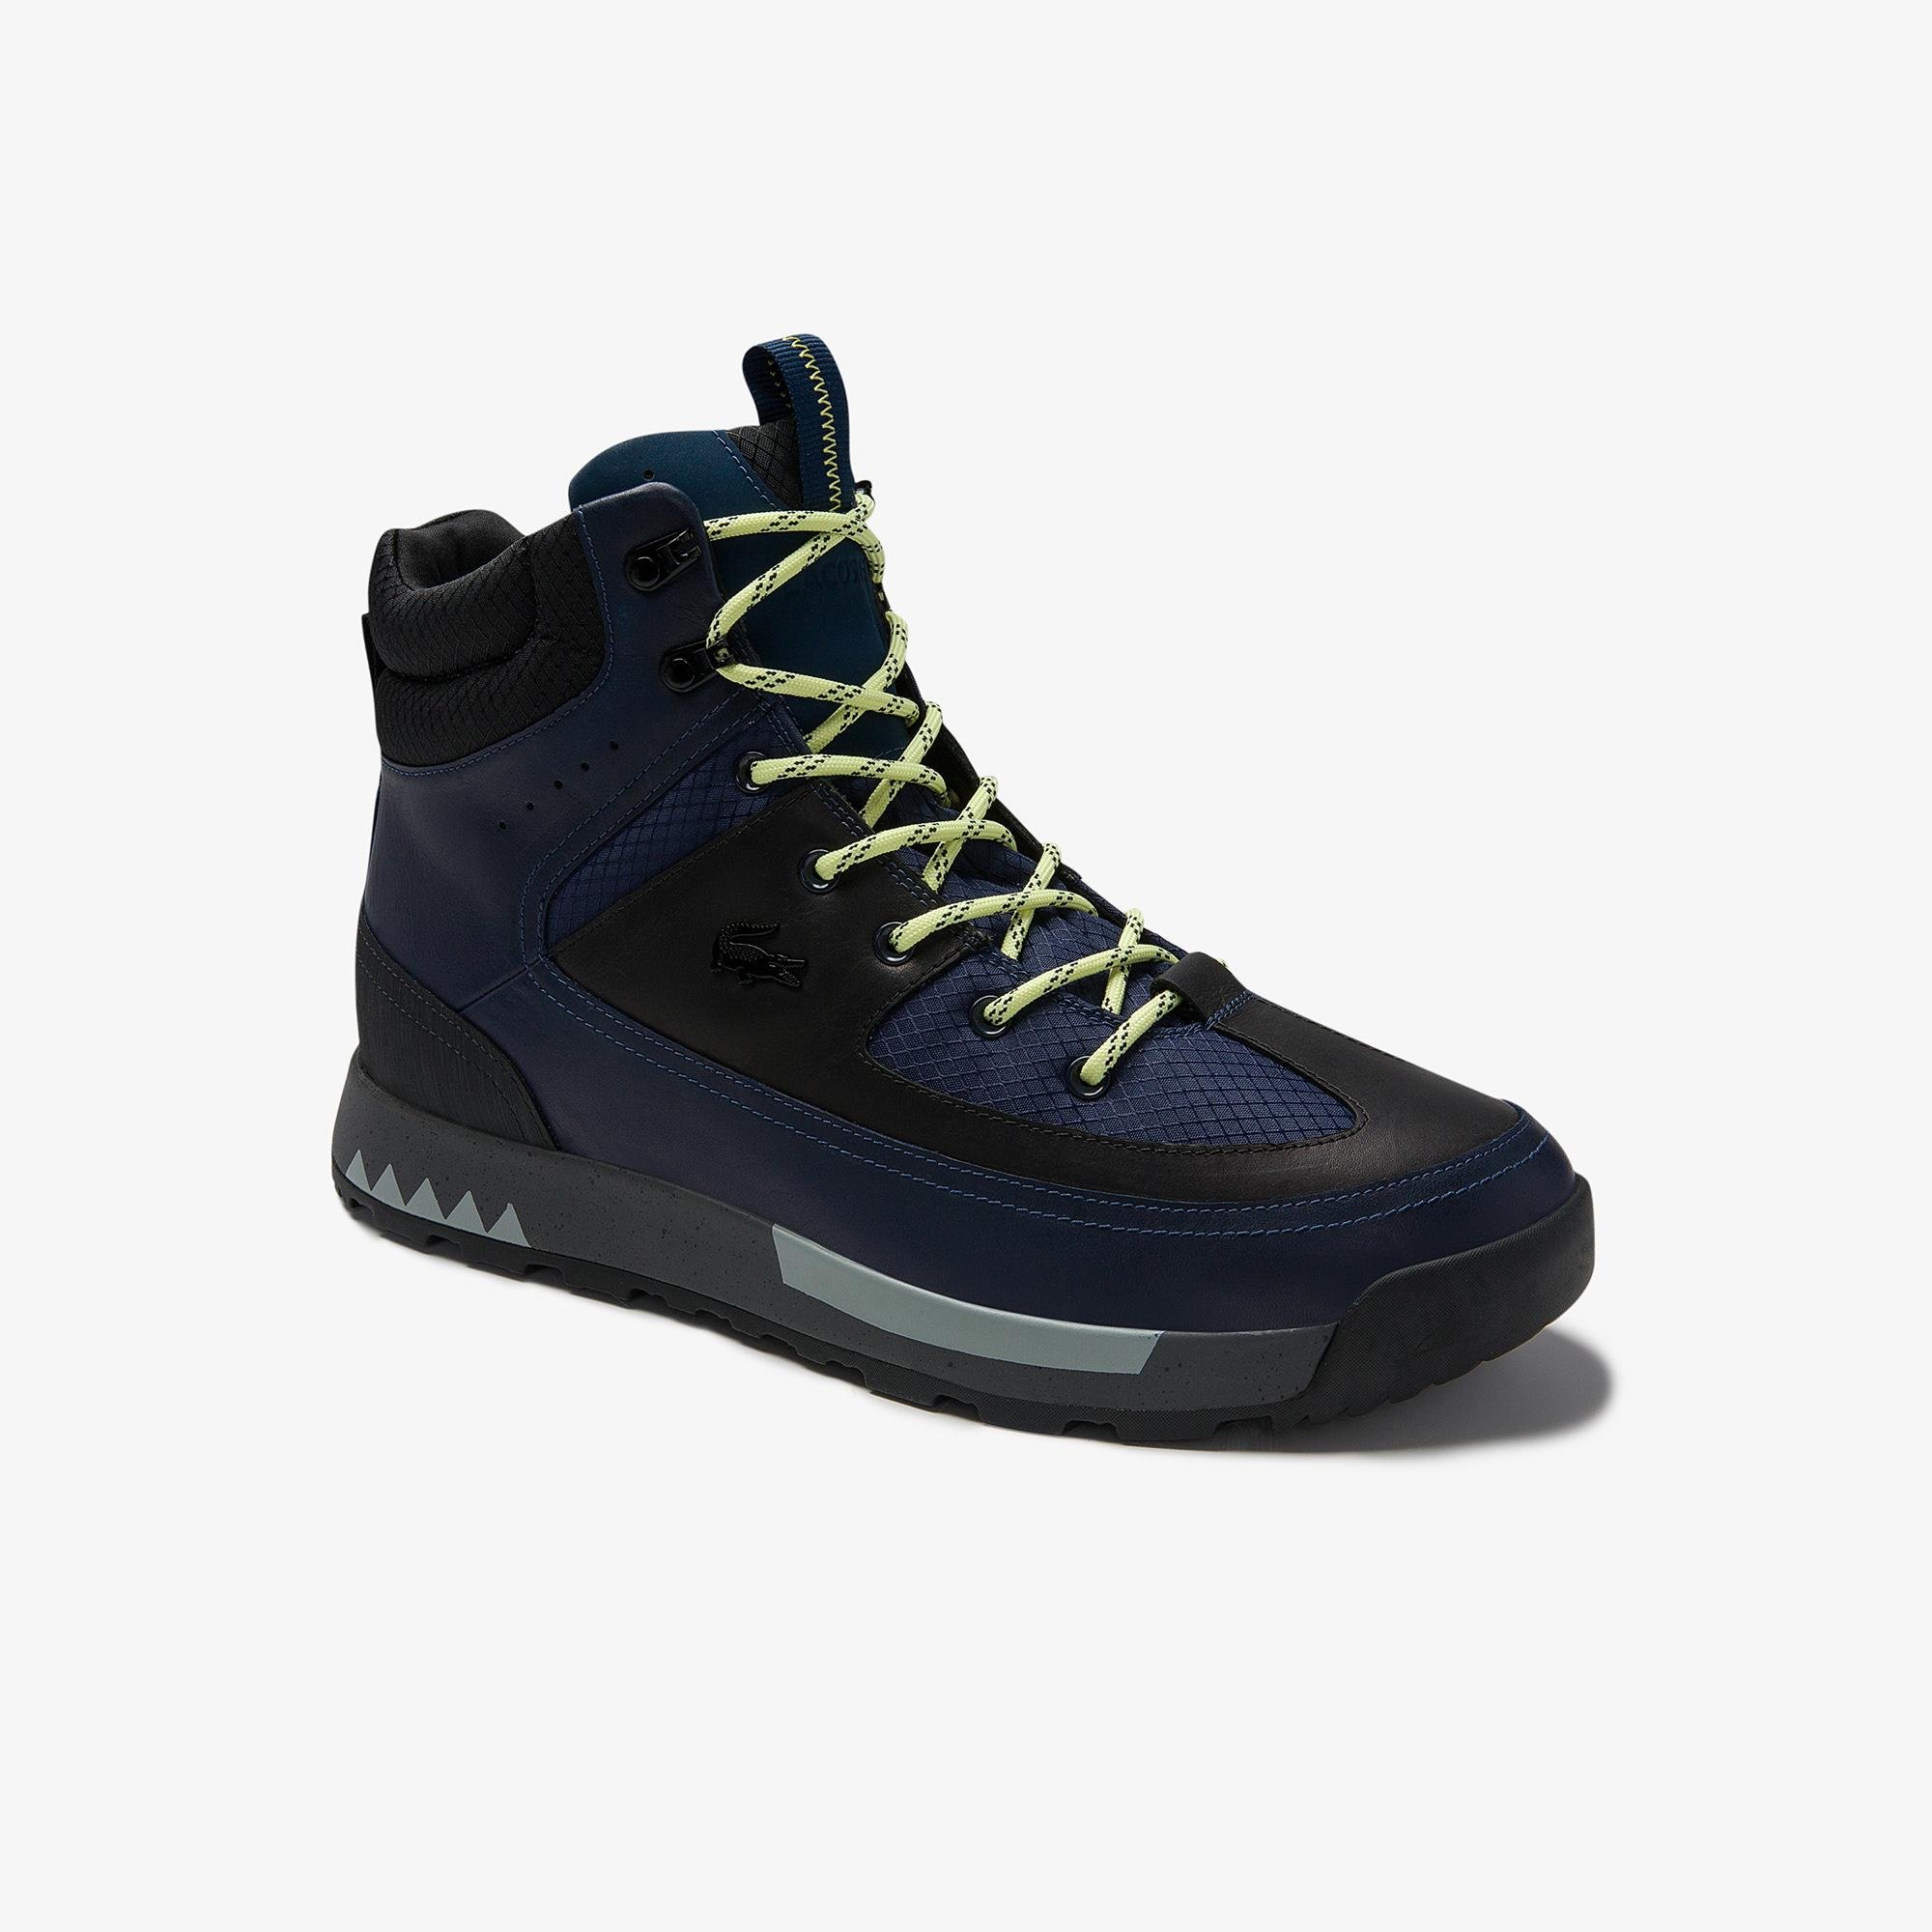 Lacoste Men's Urban Breaker Leather and Textile Boots